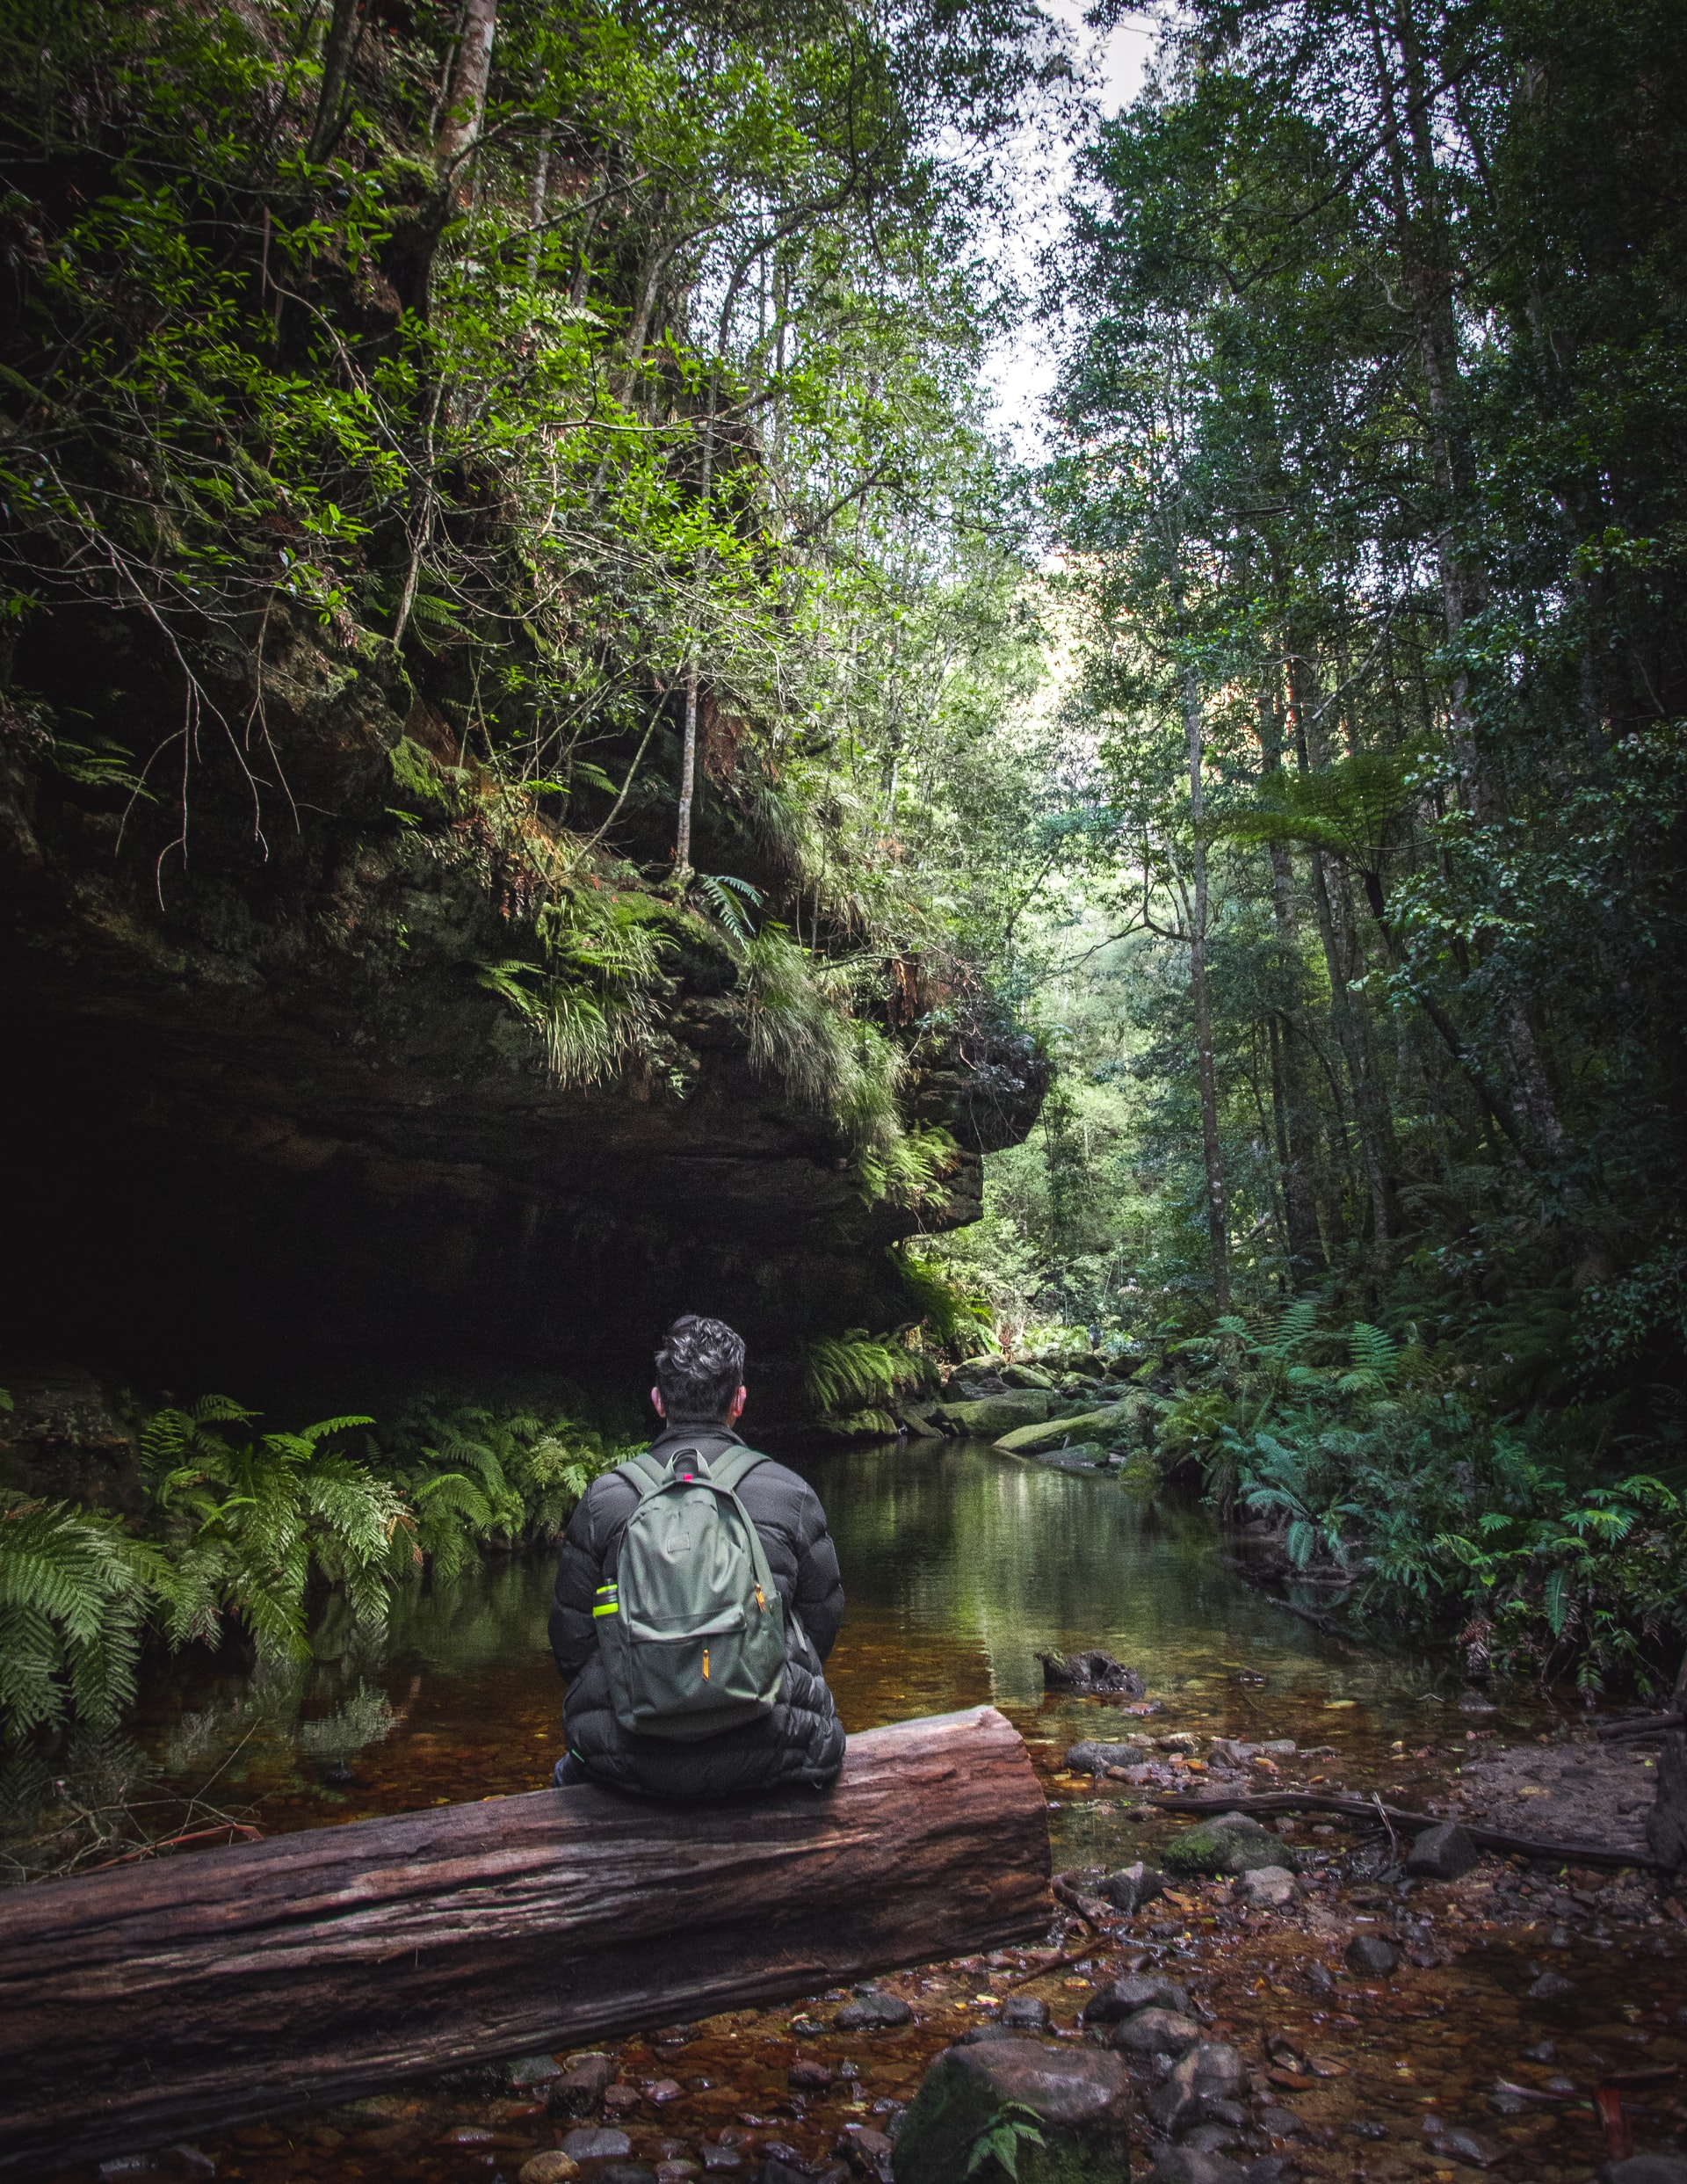 A person wearing a backpack sits on a log over a lushly forested river, looking up the river